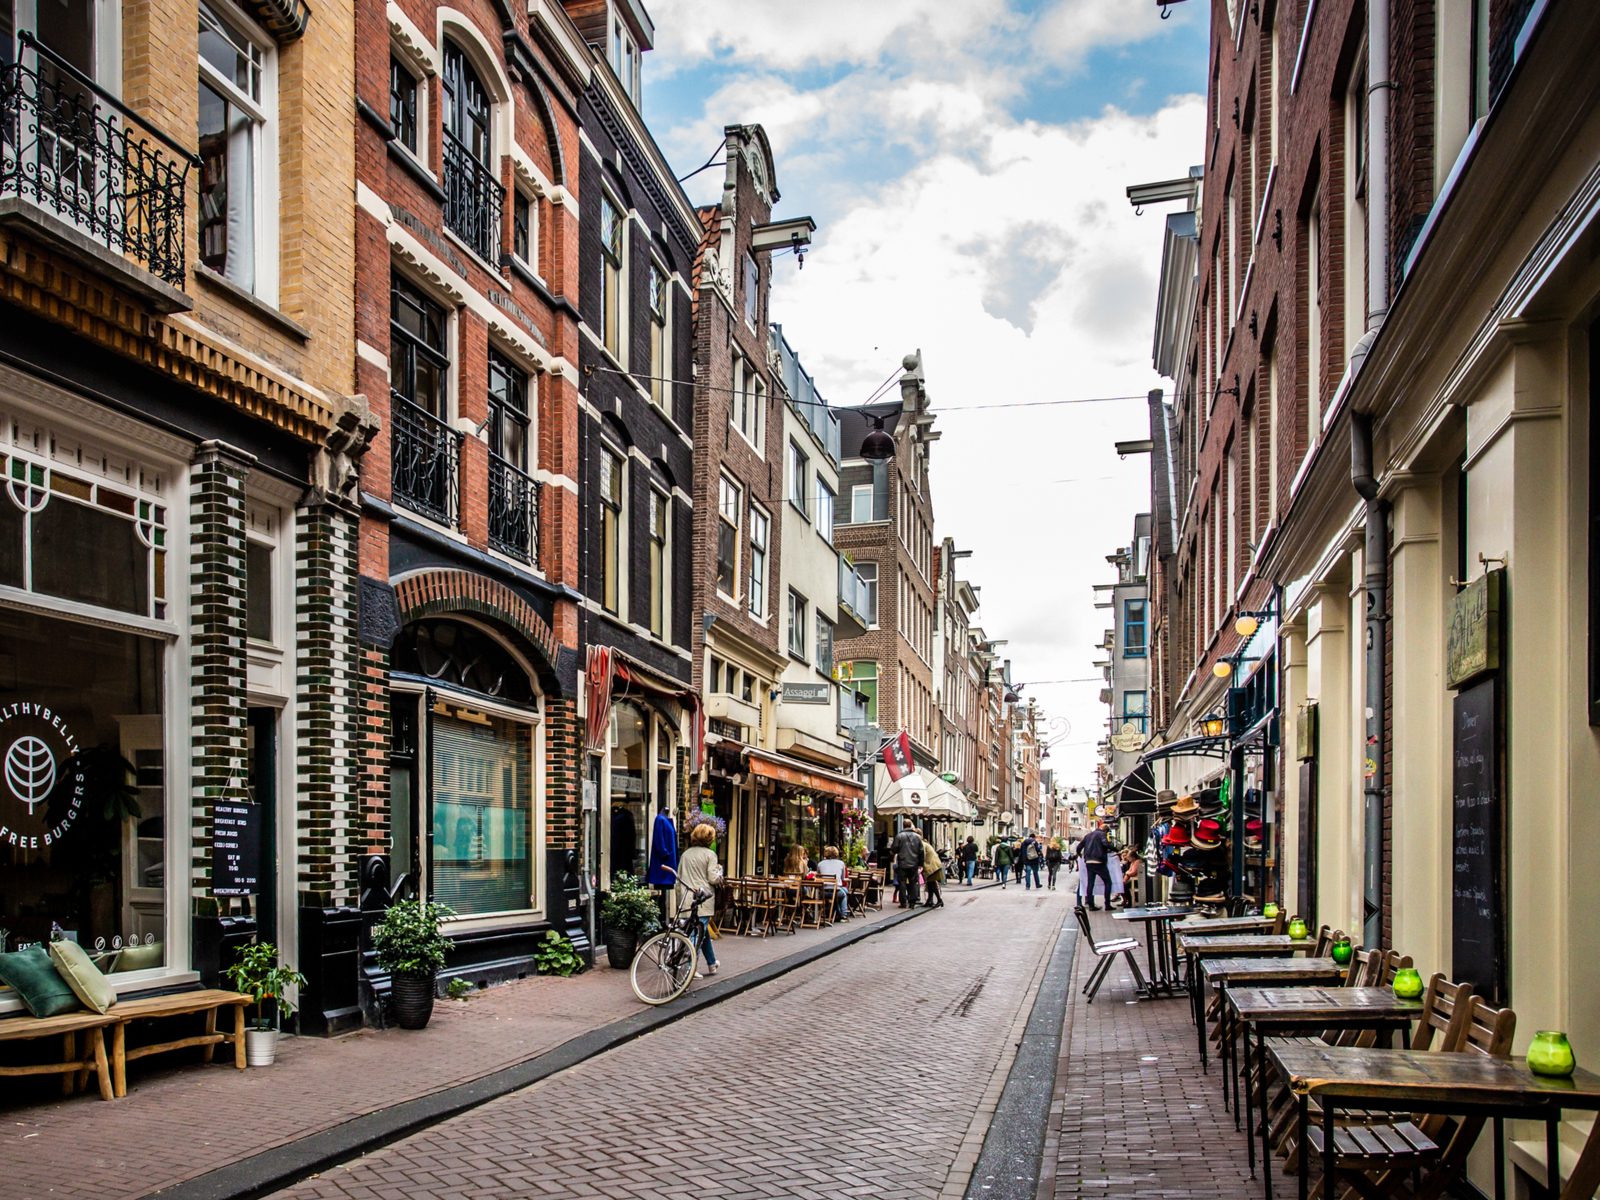 Street view of Jordaan, one of the best places to stay in Amsterdam